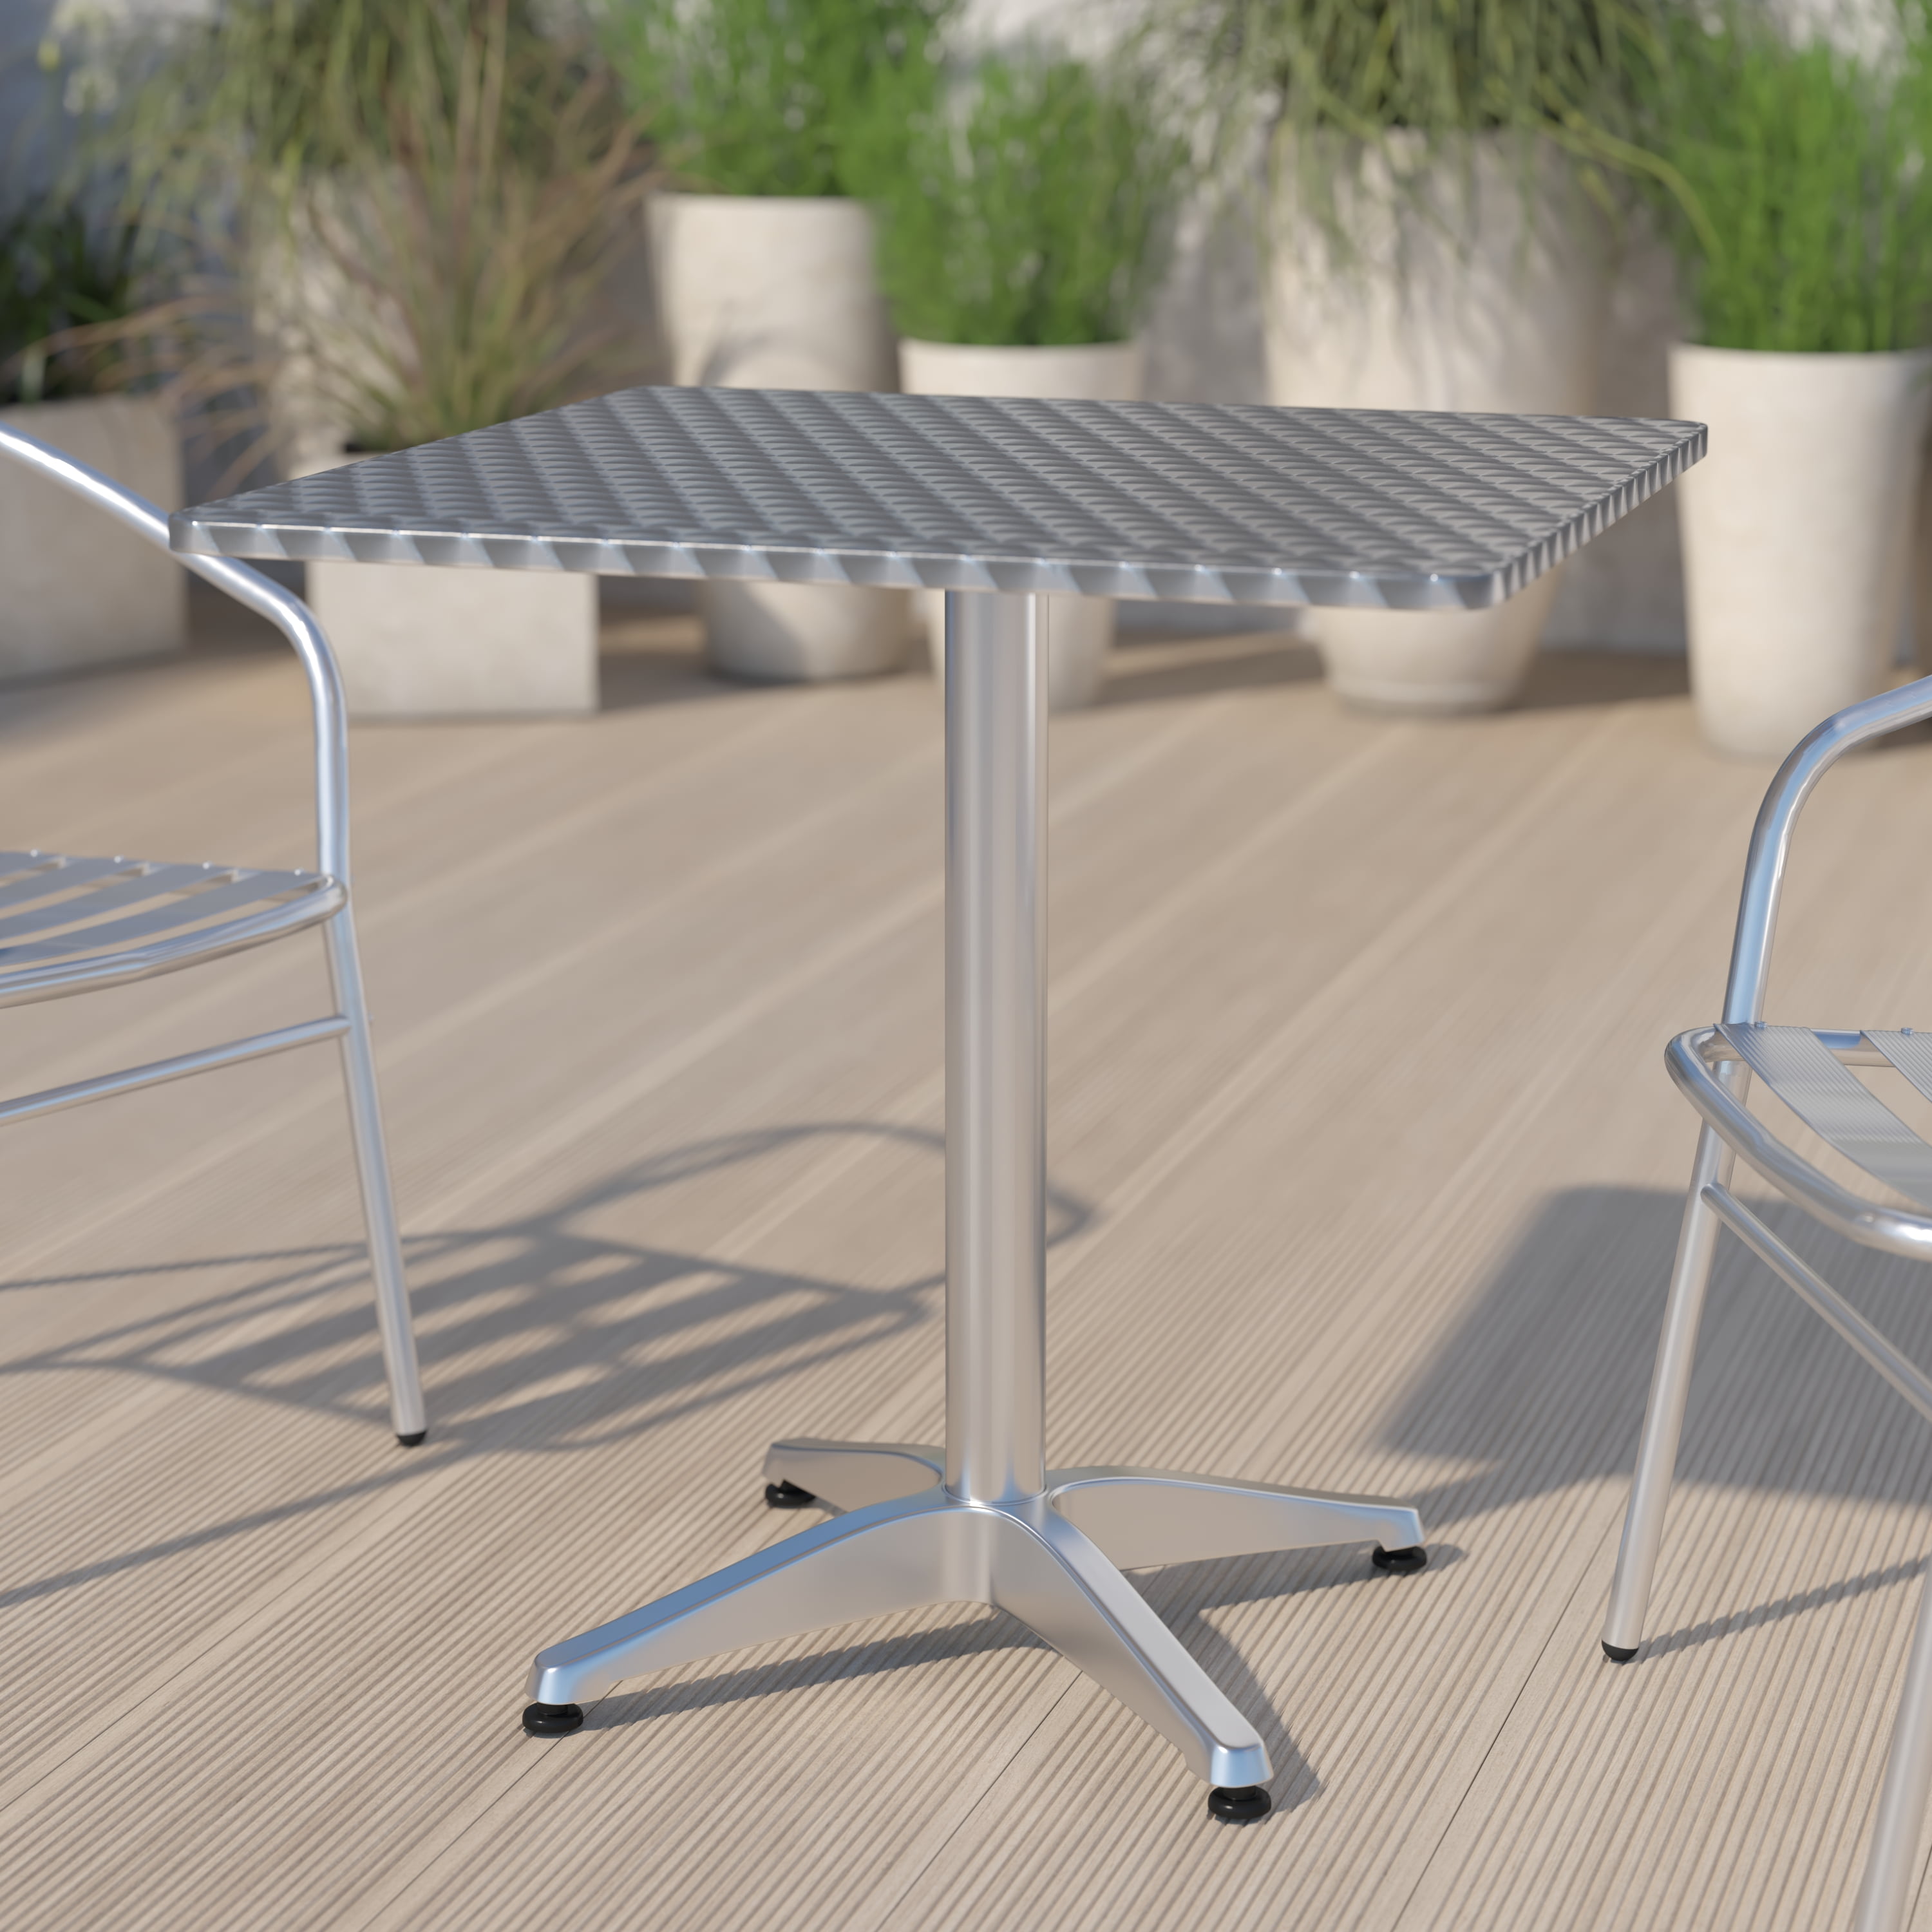 Details about    Patio Bar Table 23.5'' Round Aluminum Indoor-Outdoor Dining Base 